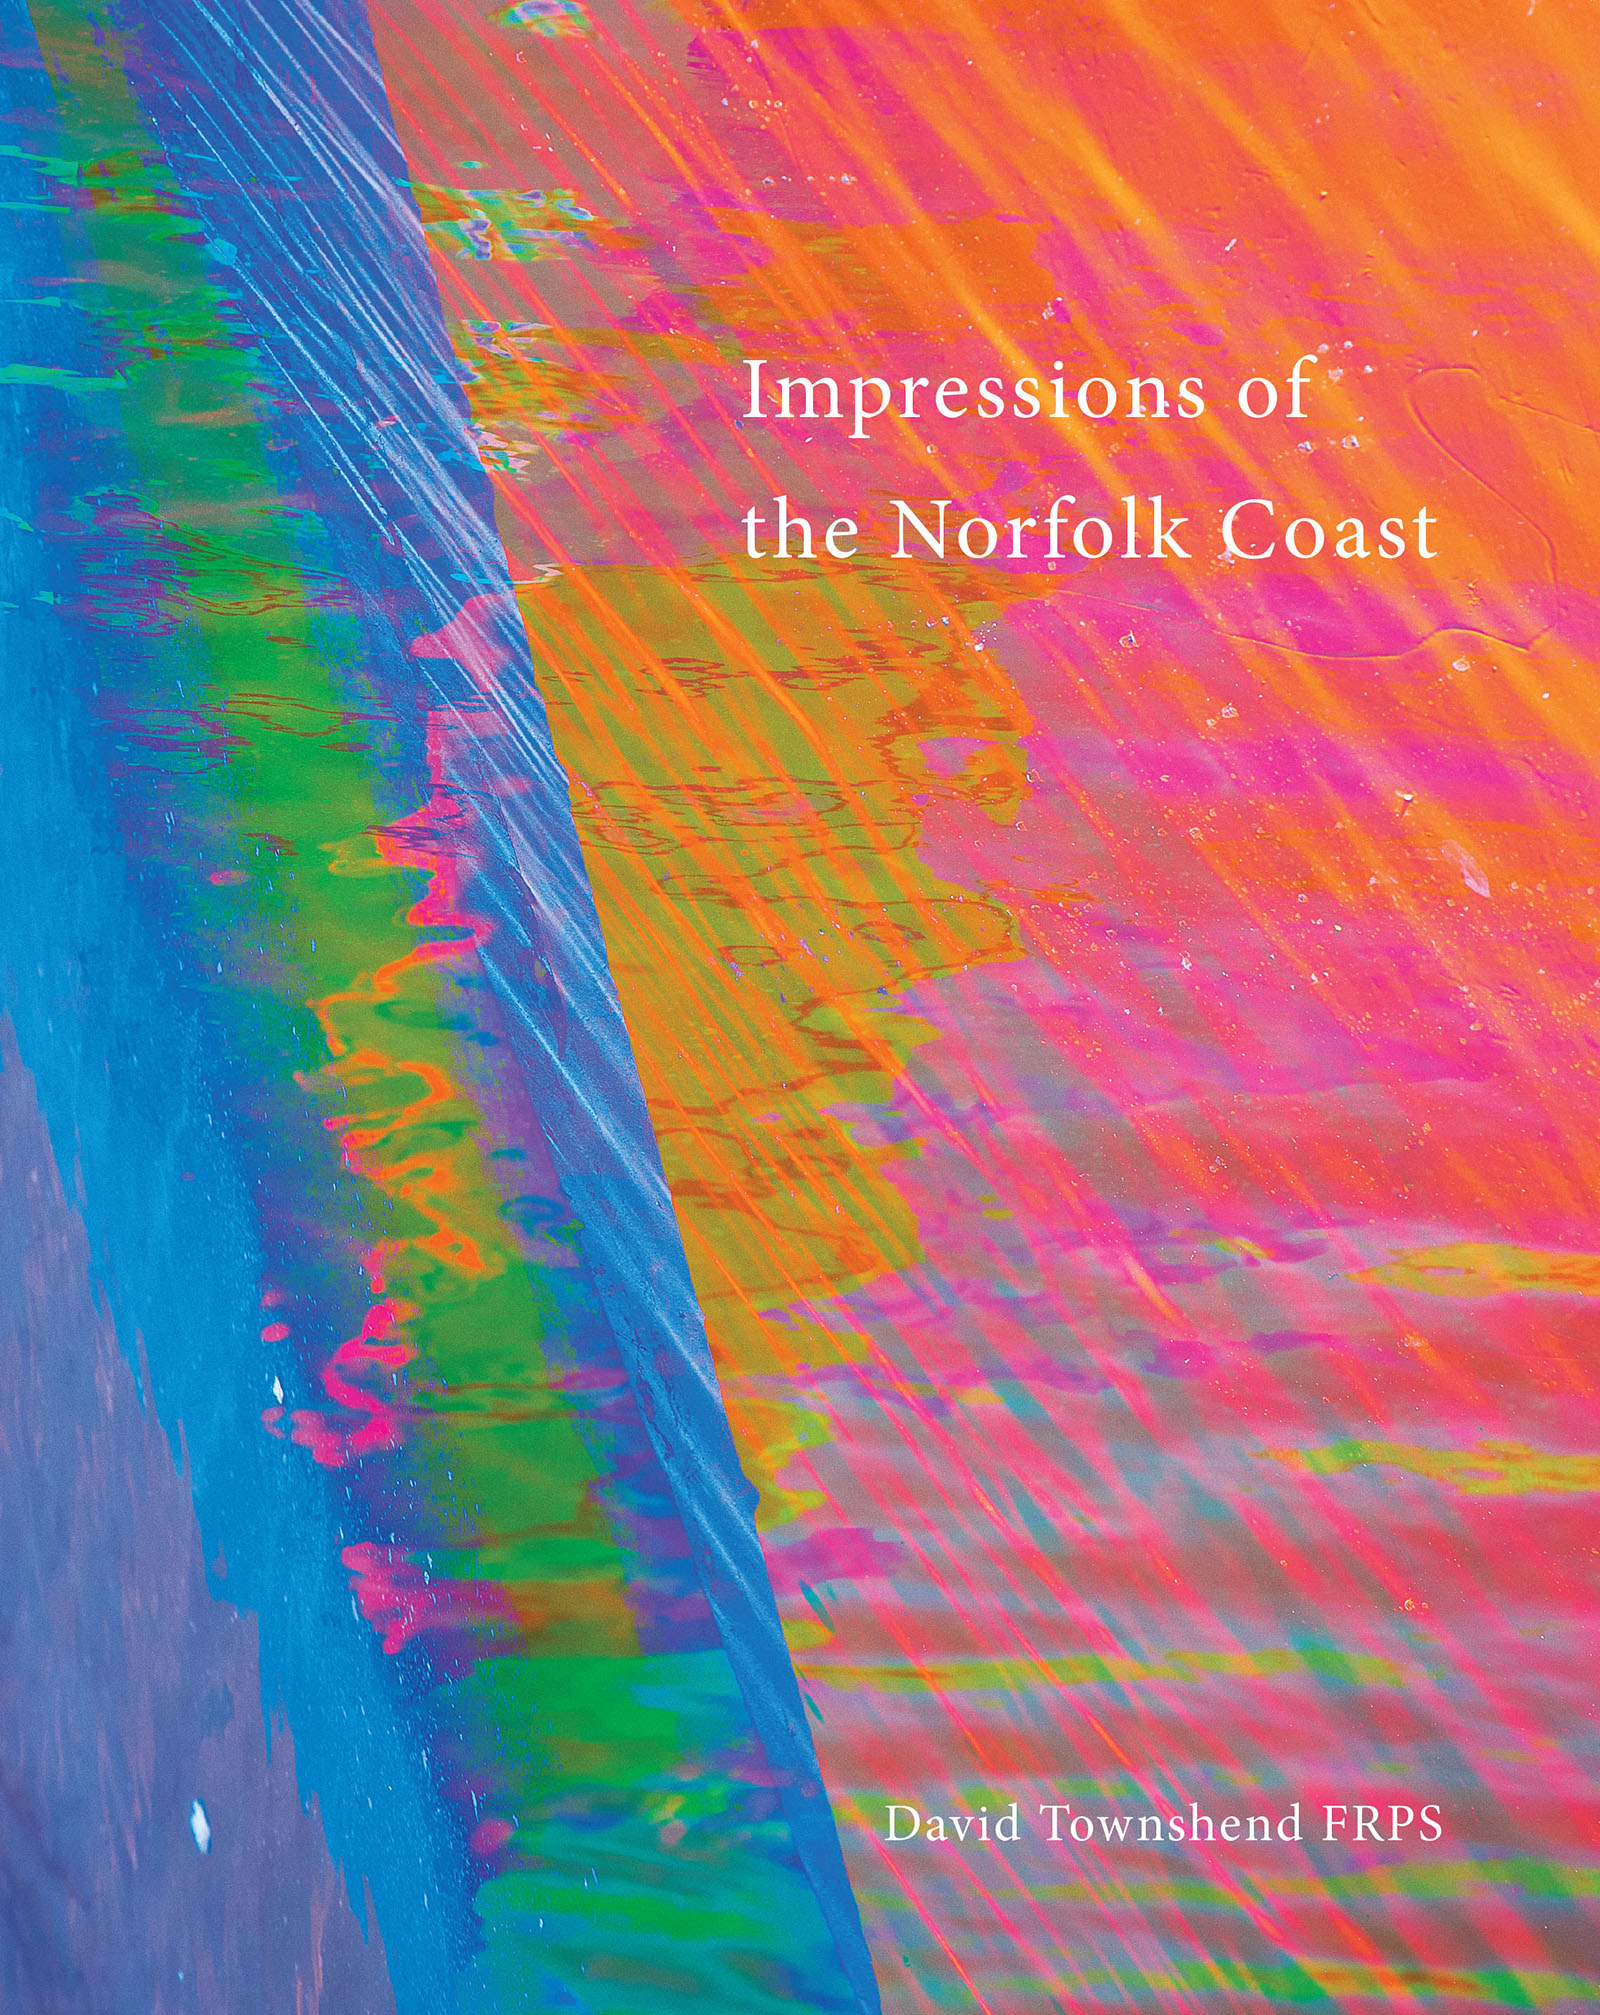 Impressions Of Norfolk Coast Cover - David Townshend FRPS